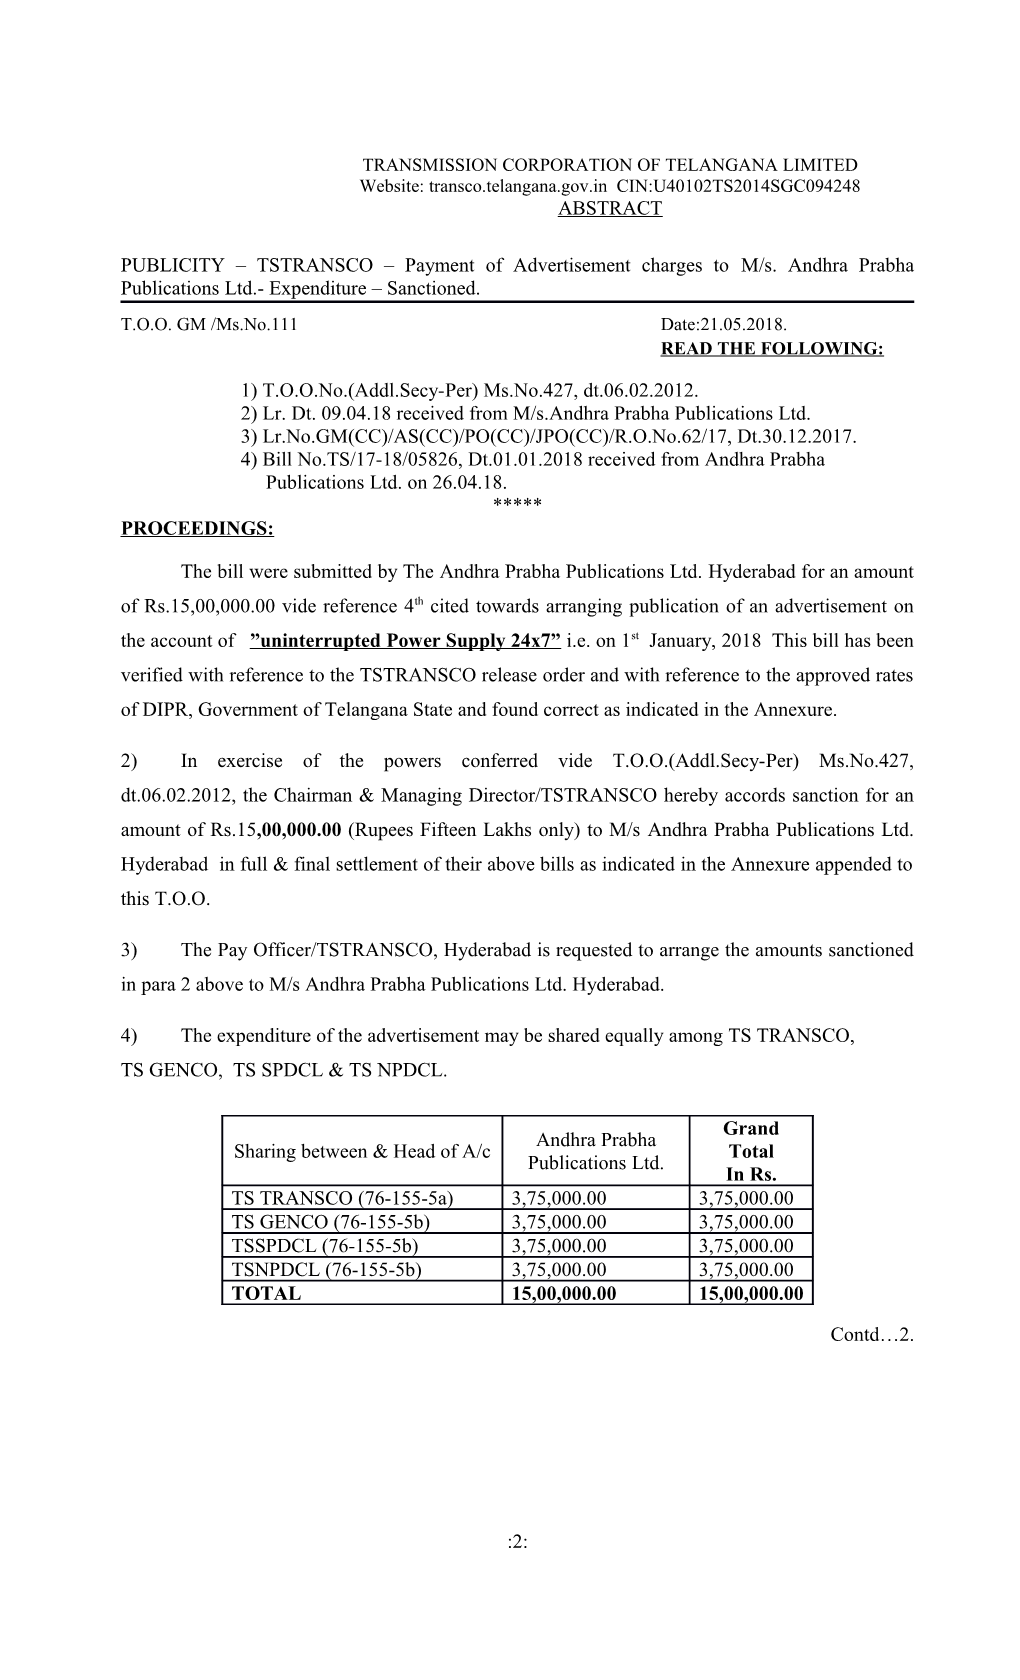 PUBLICITY TSTRANSCO Payment of Advertisement Charges Tom/S. Andhra Prabha Publications